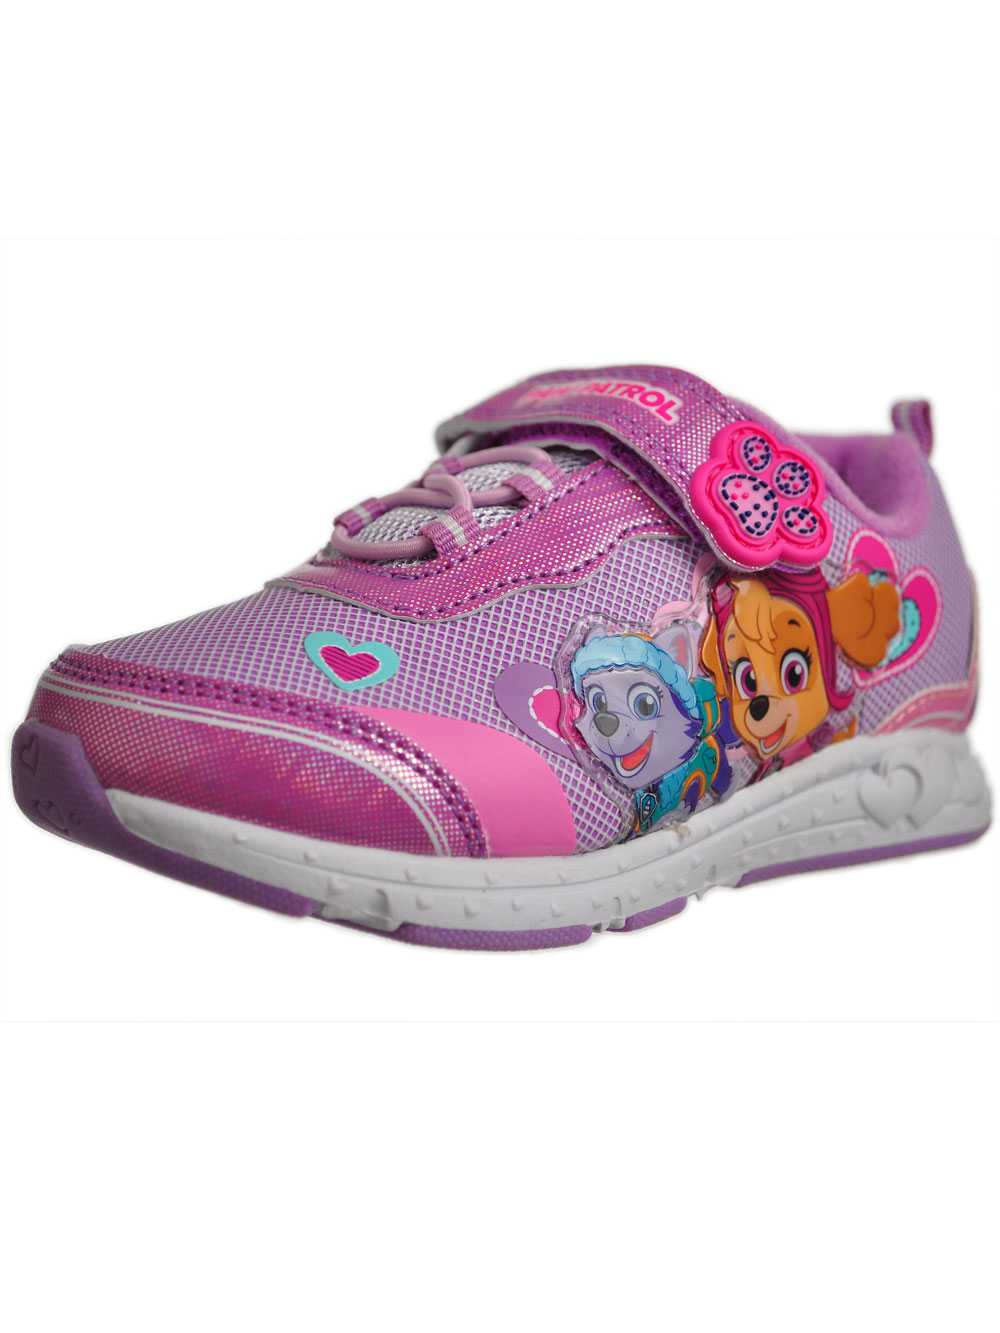 paw patrol light up shoes girl